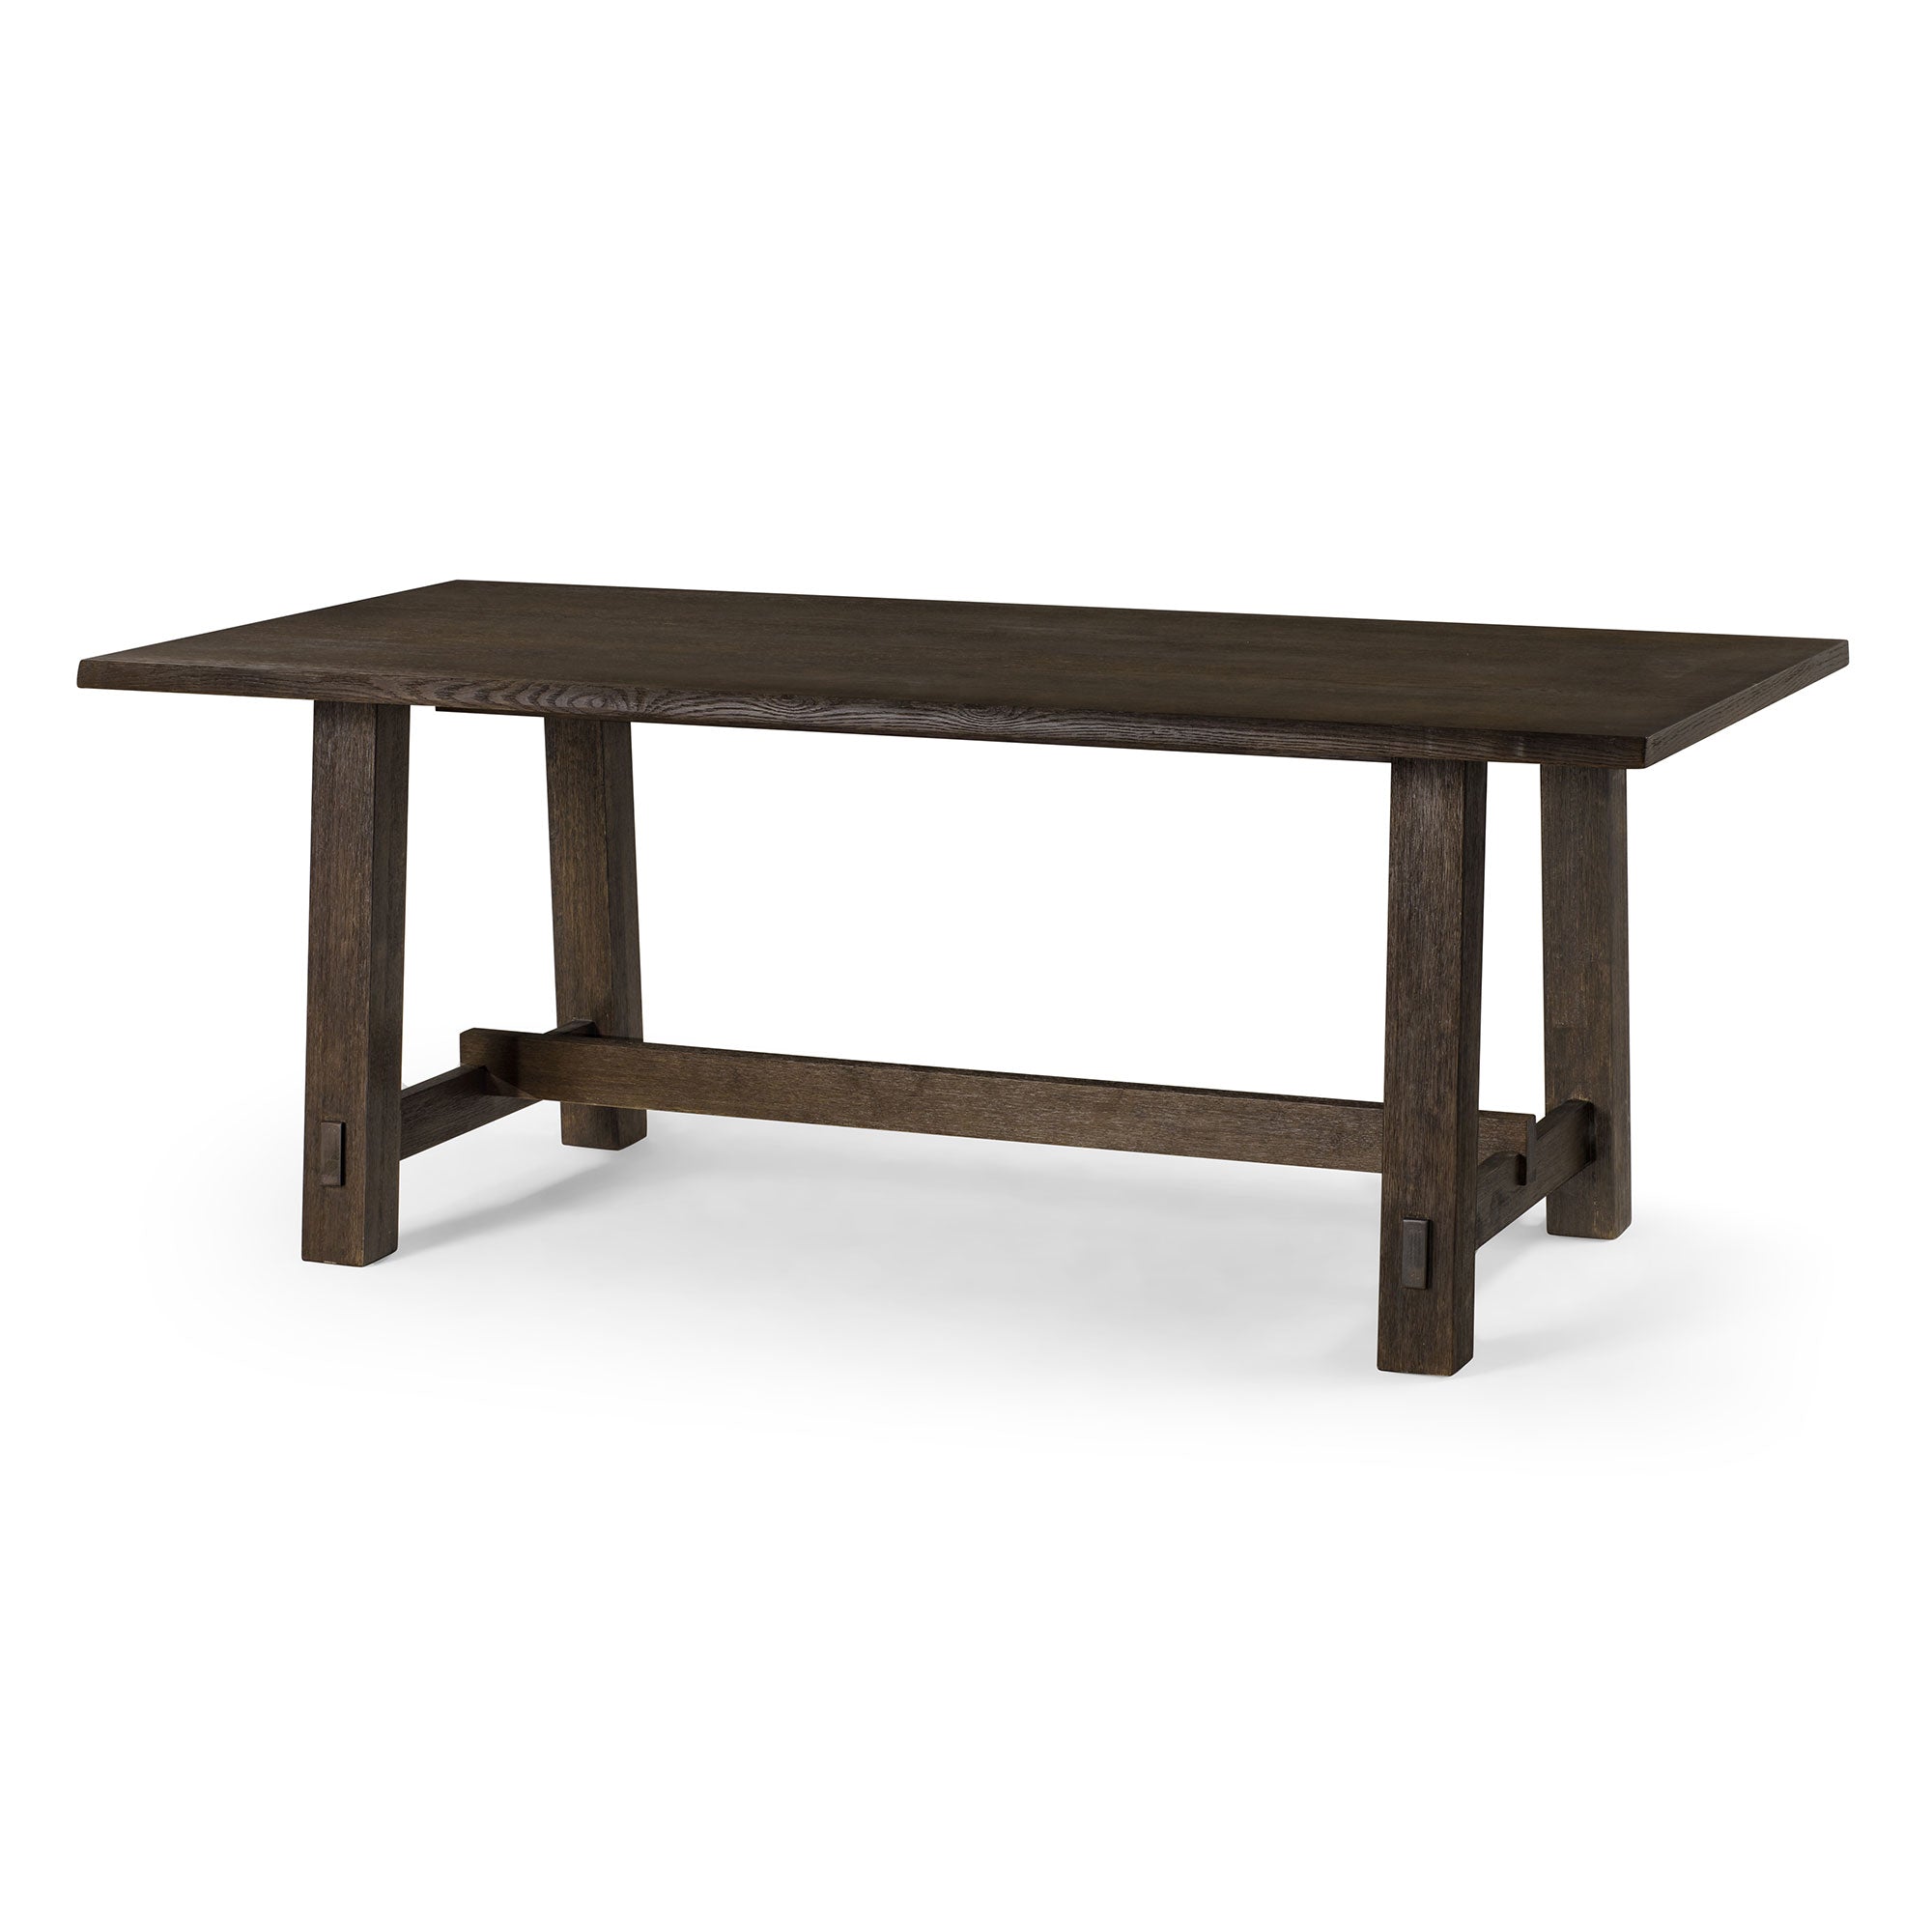 Maven-Lane-Yves-Rectangular-Wooden-Dining-Table-in-Weathered-Brown-Finish-Kitchen-&-Dining-Room-Tables